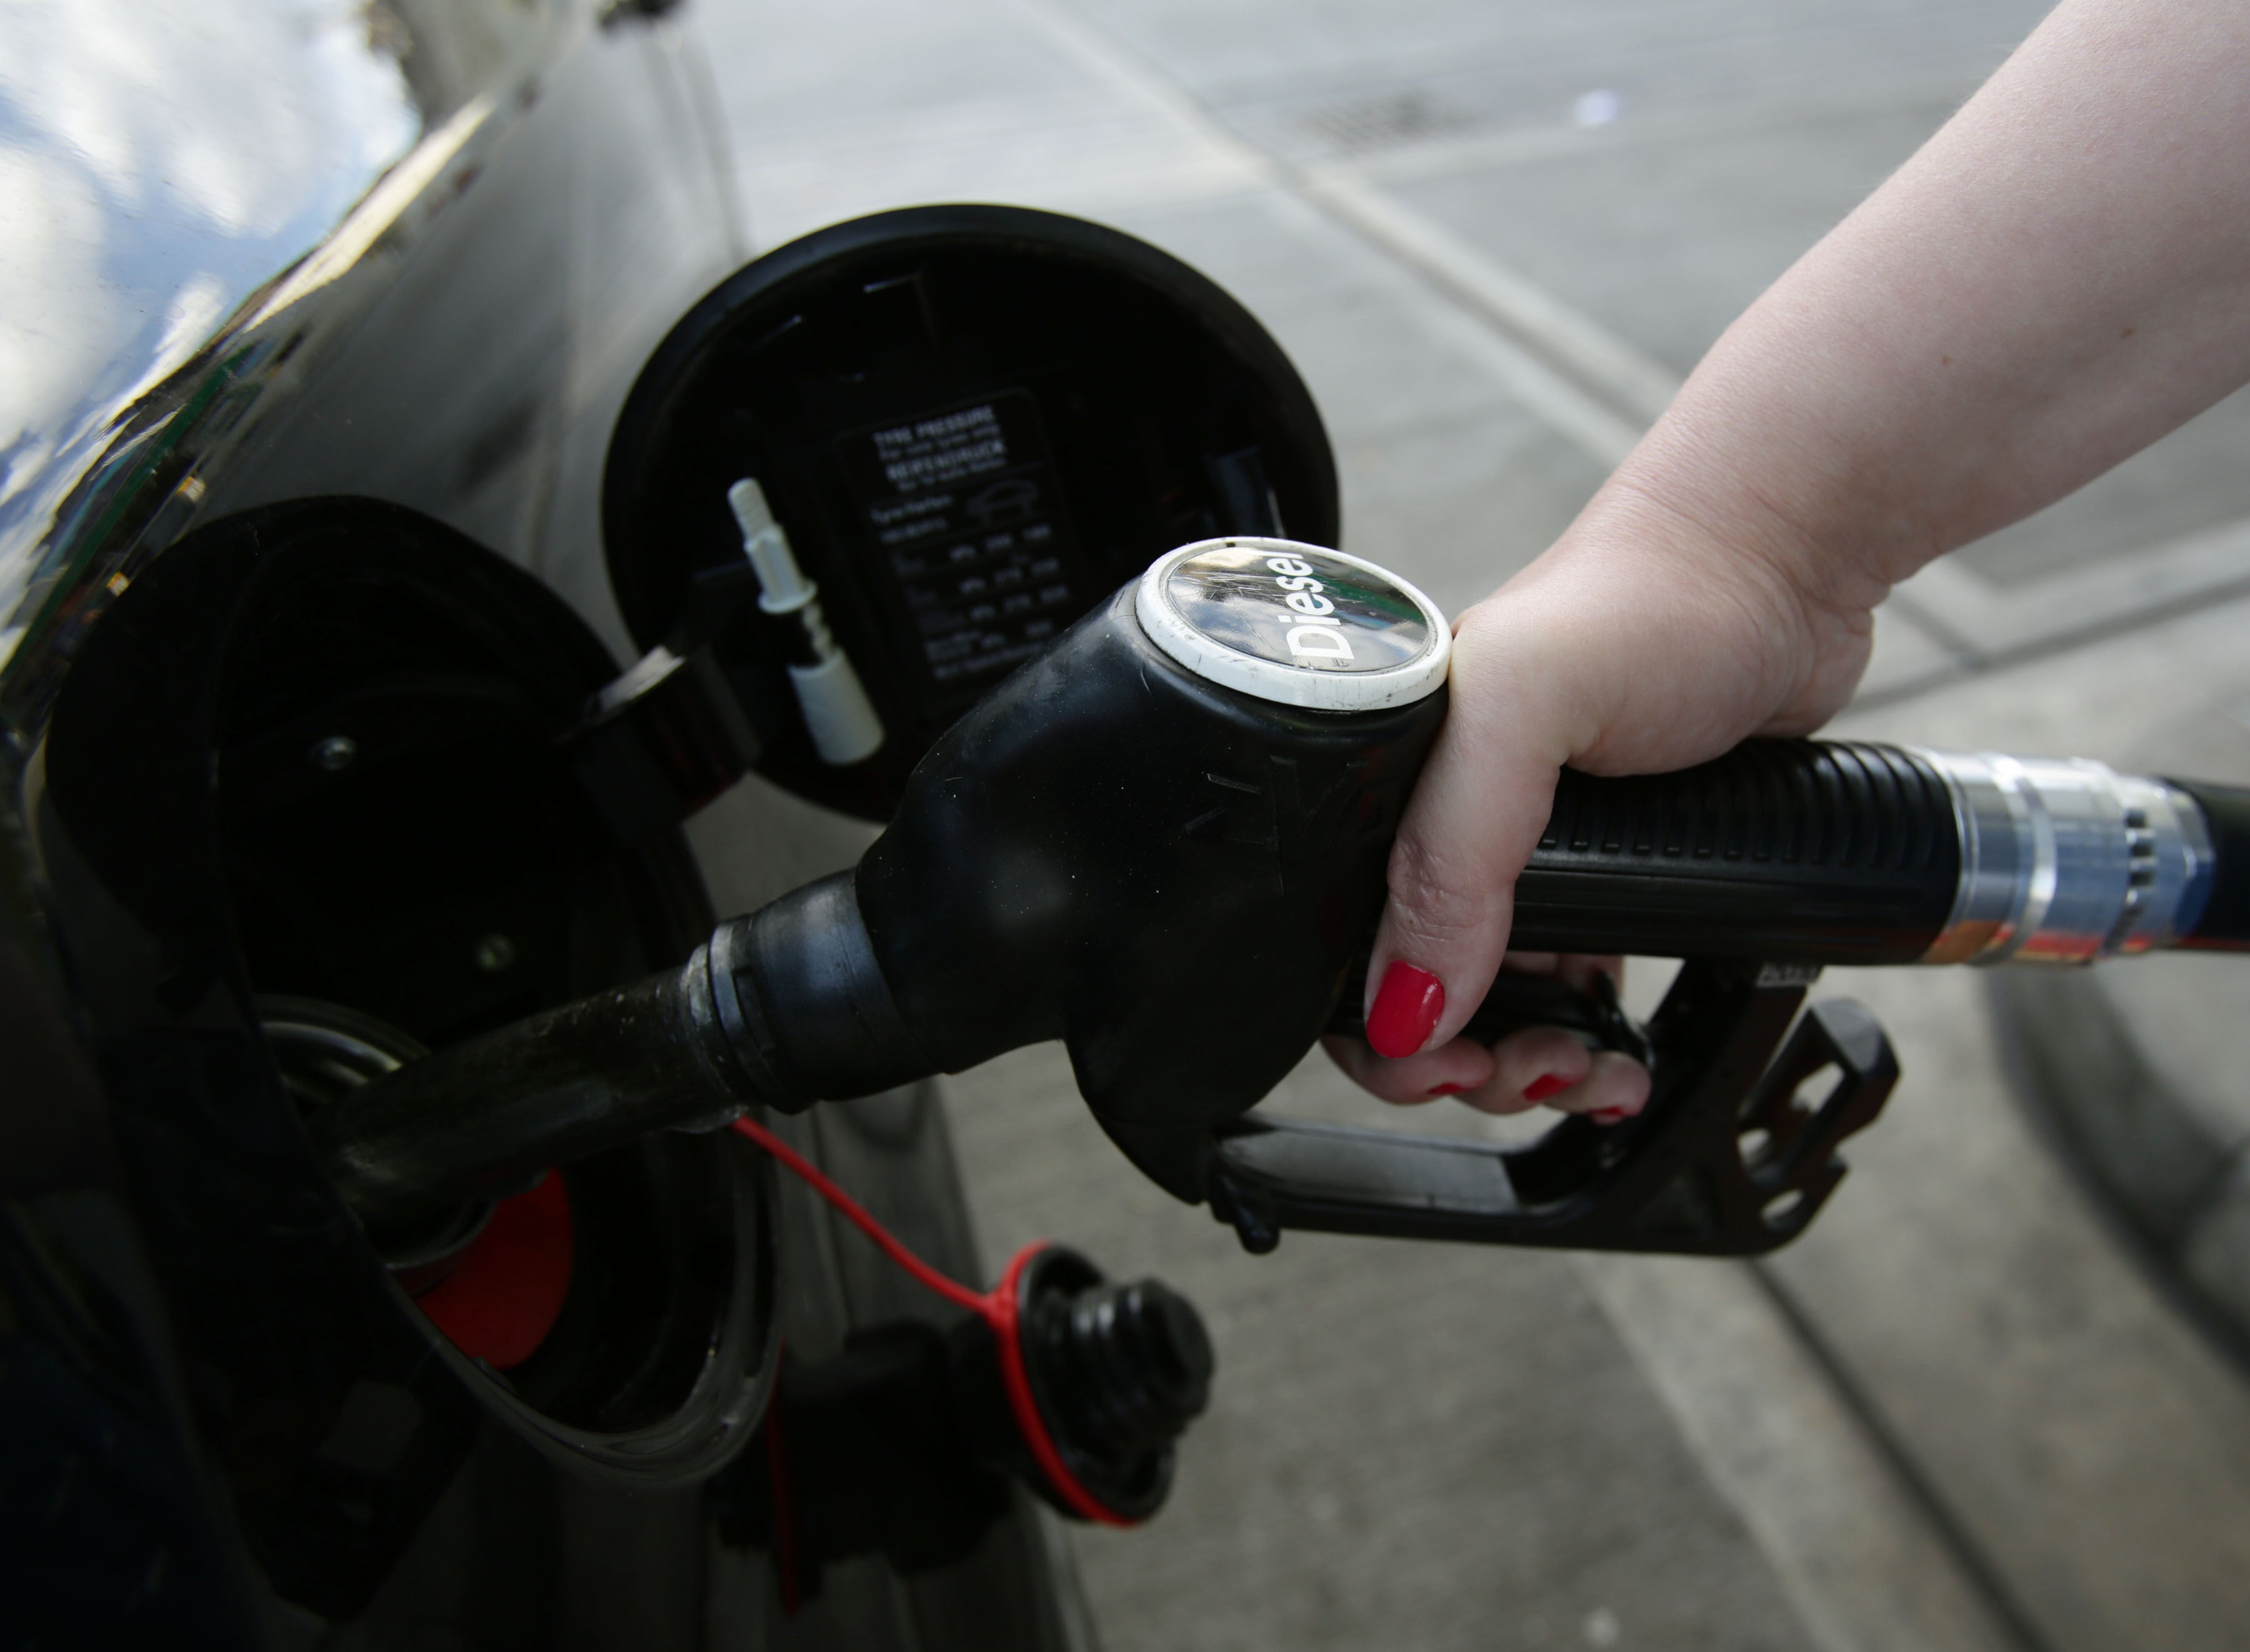 Forecourts were urged to pass the tax cut to motorists to to help with rising fuel prices